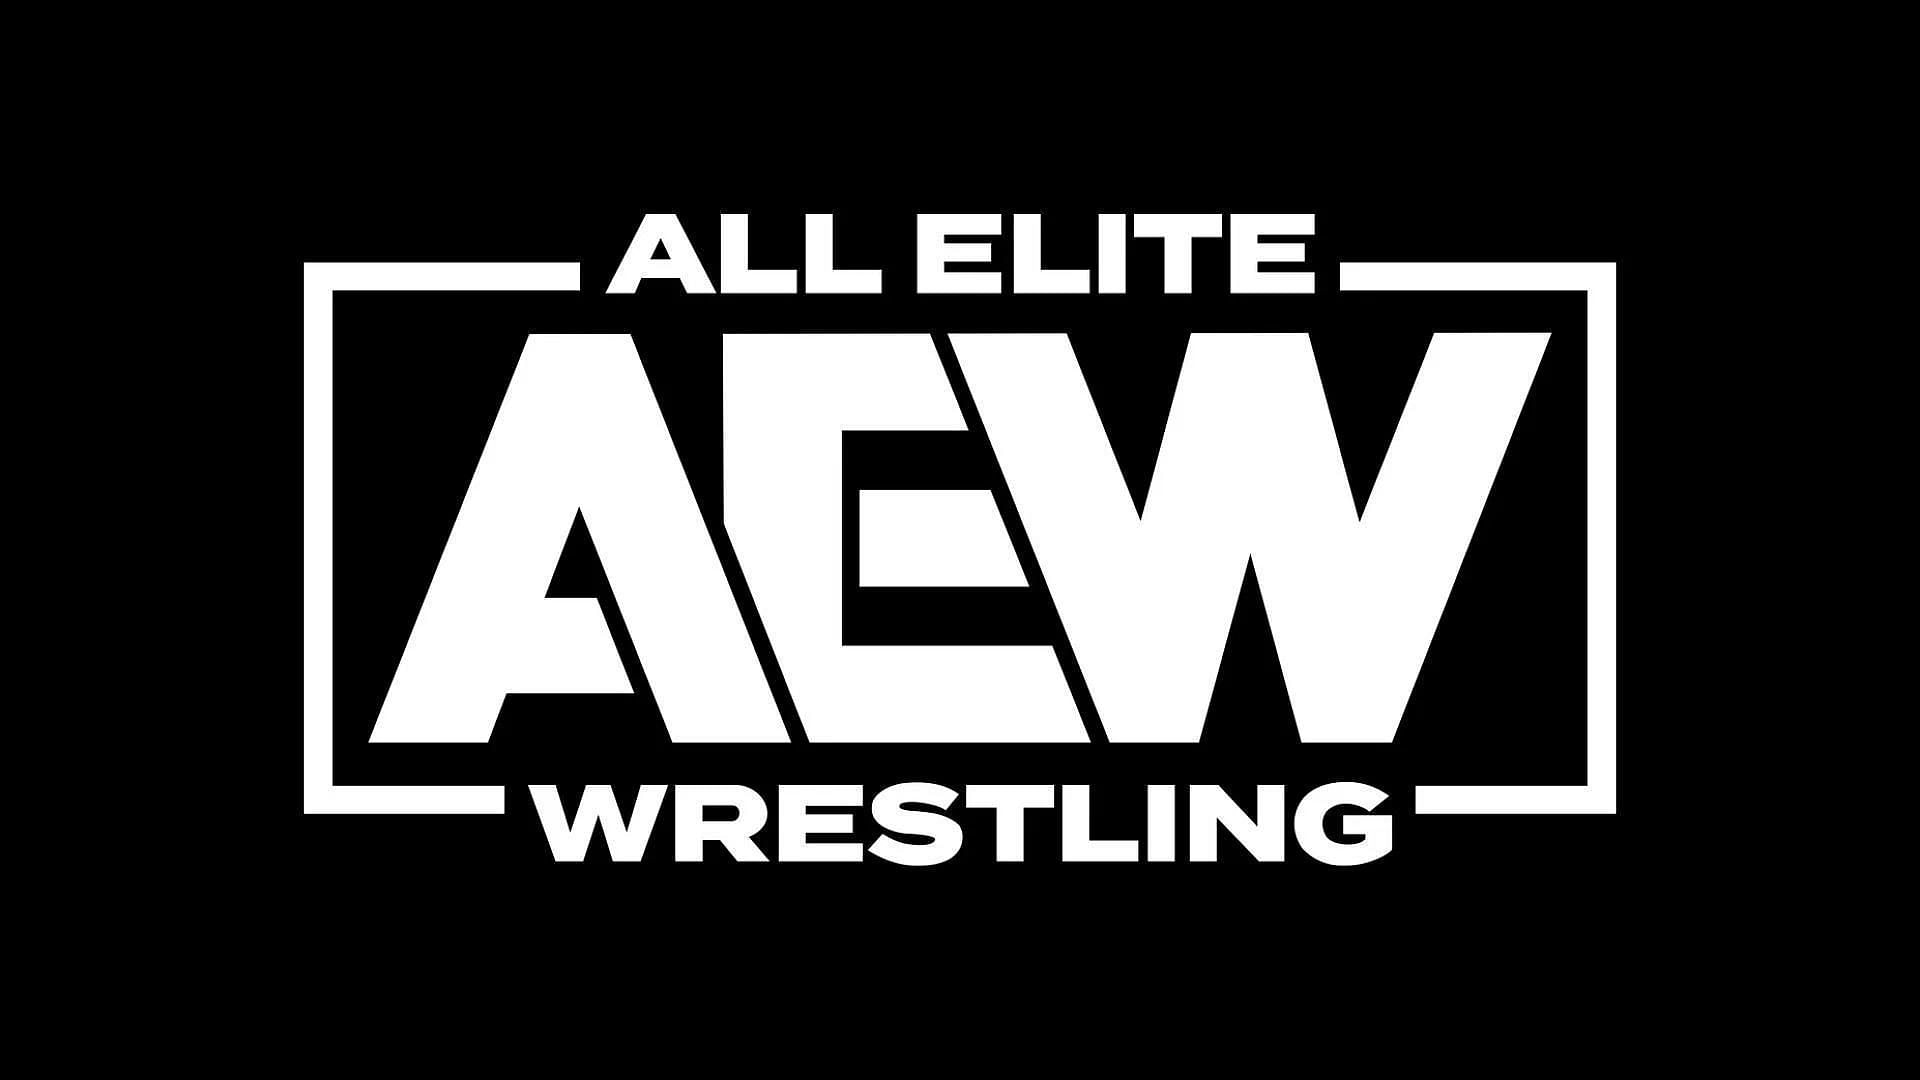 Morale in AEW seems to be at an all time low